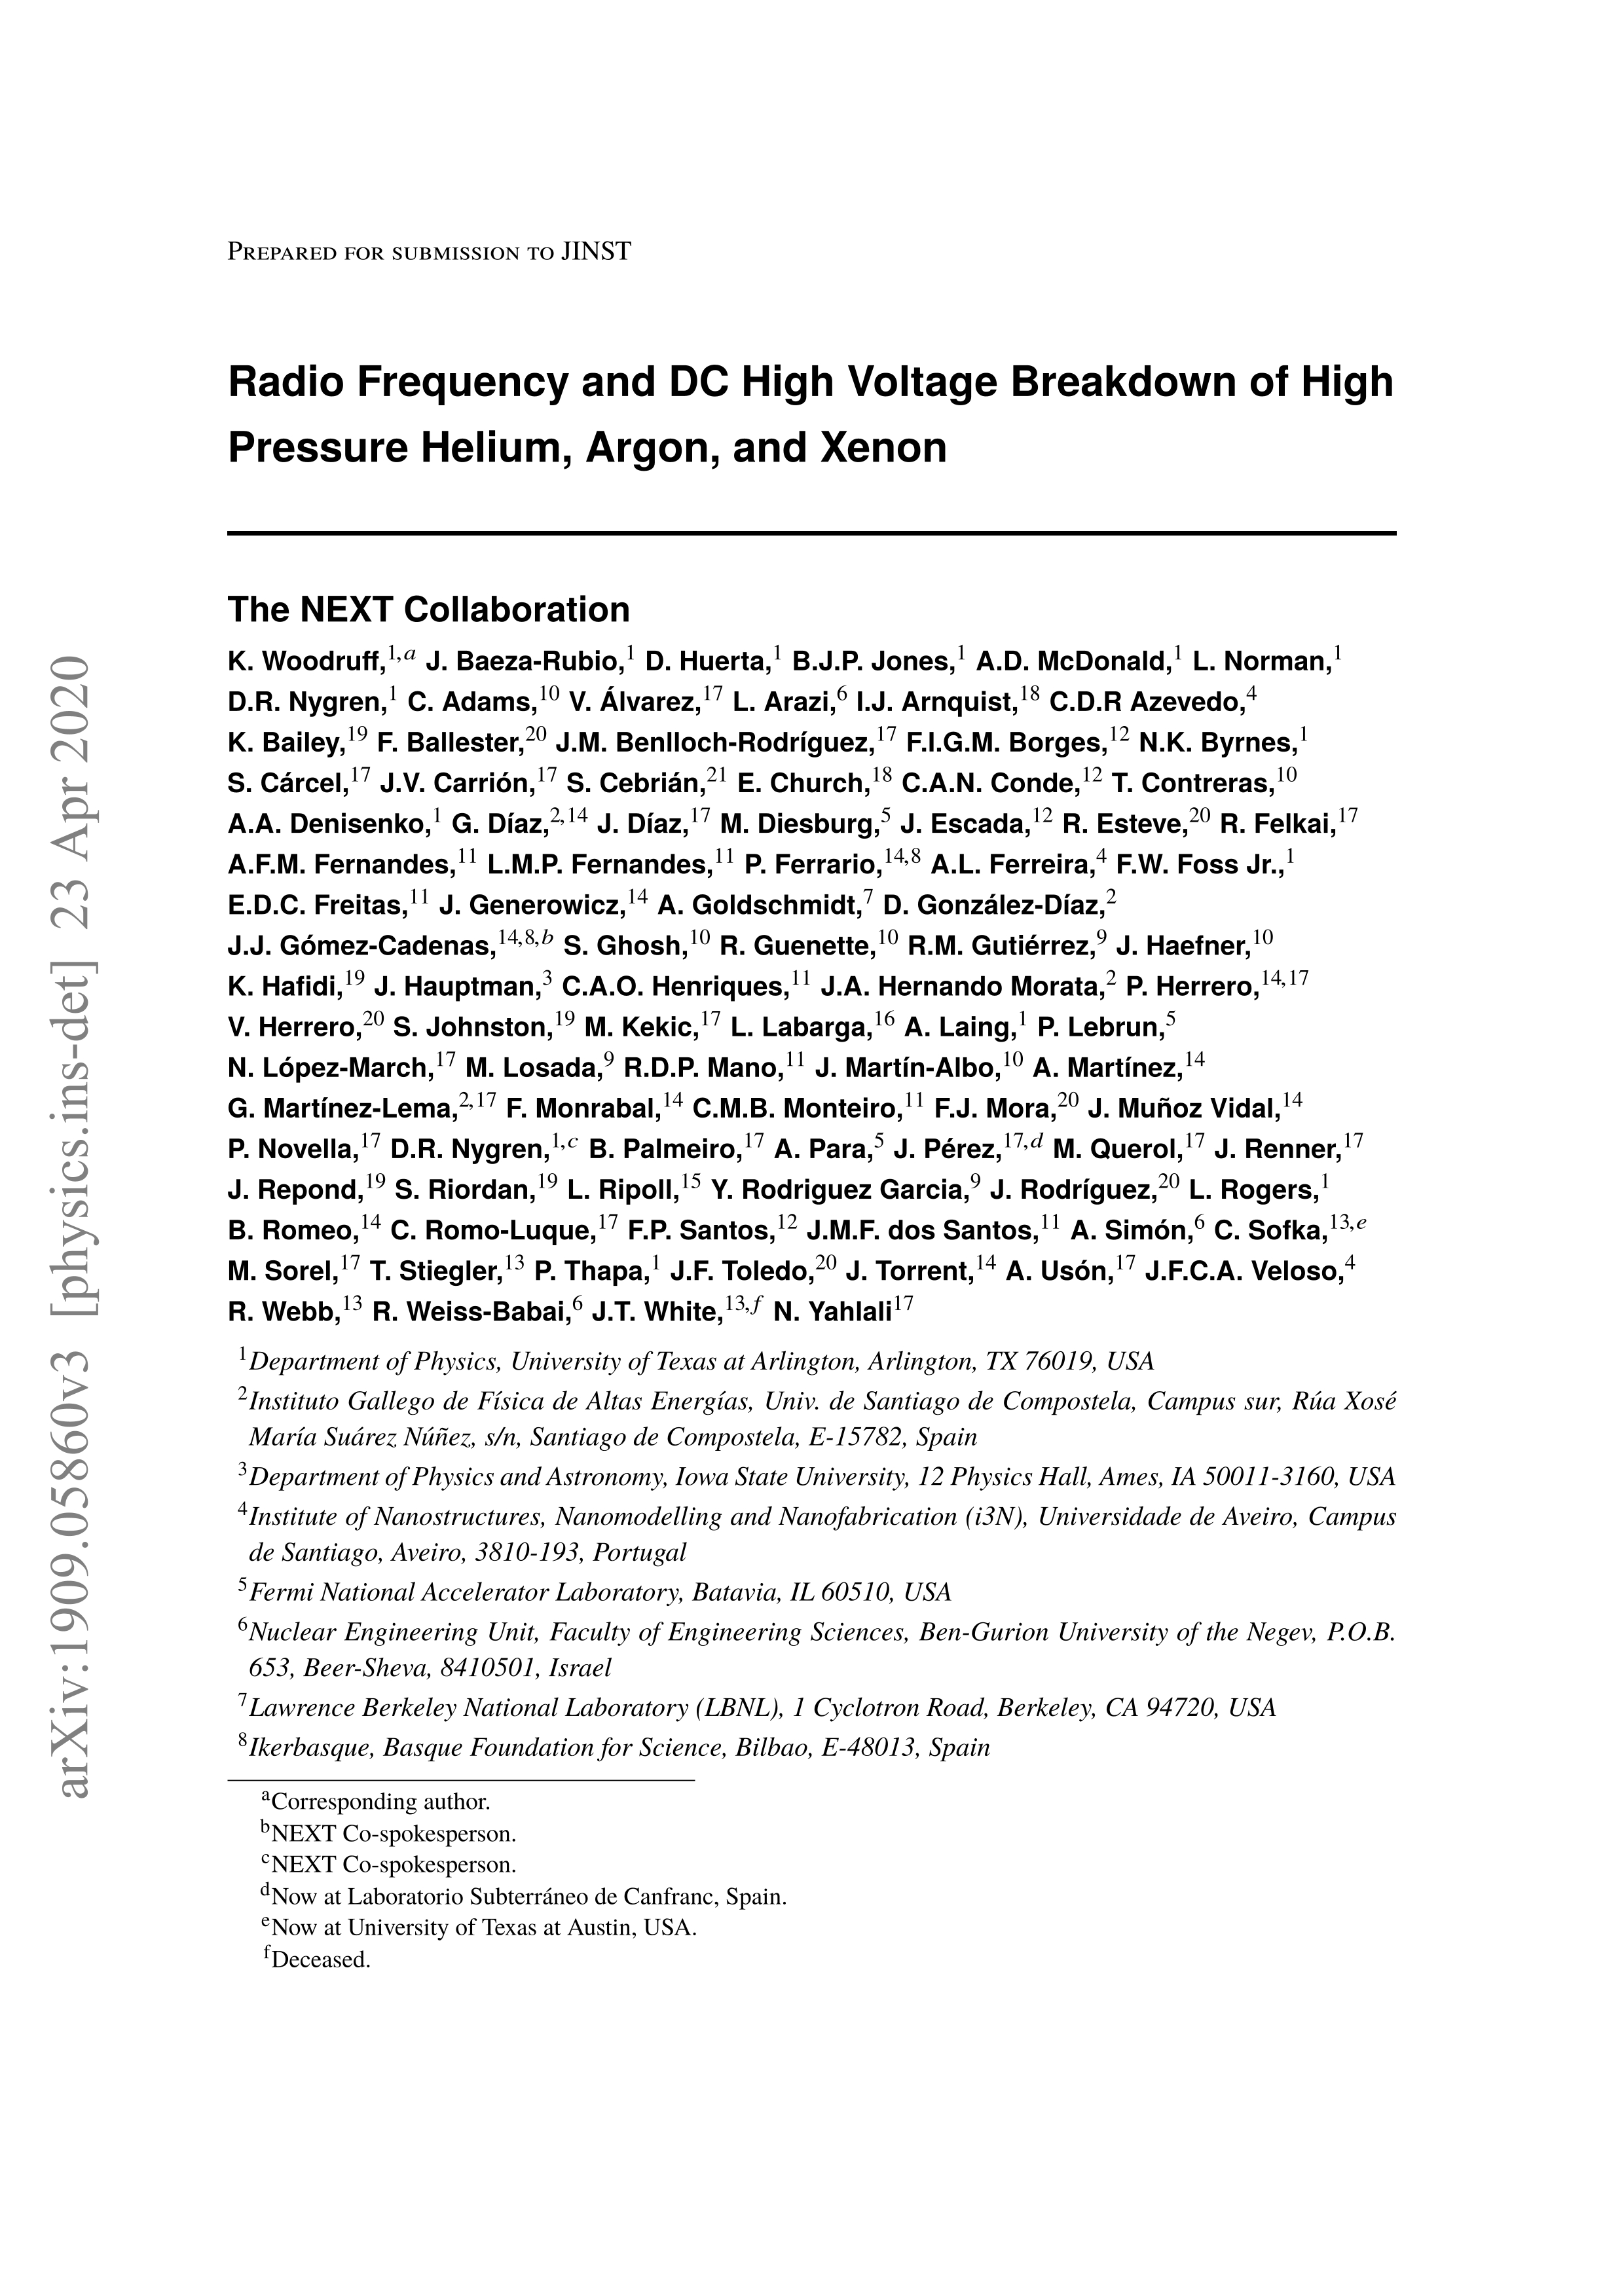 Radio frequency and DC high voltage breakdown of high pressure helium, argon, and xenon